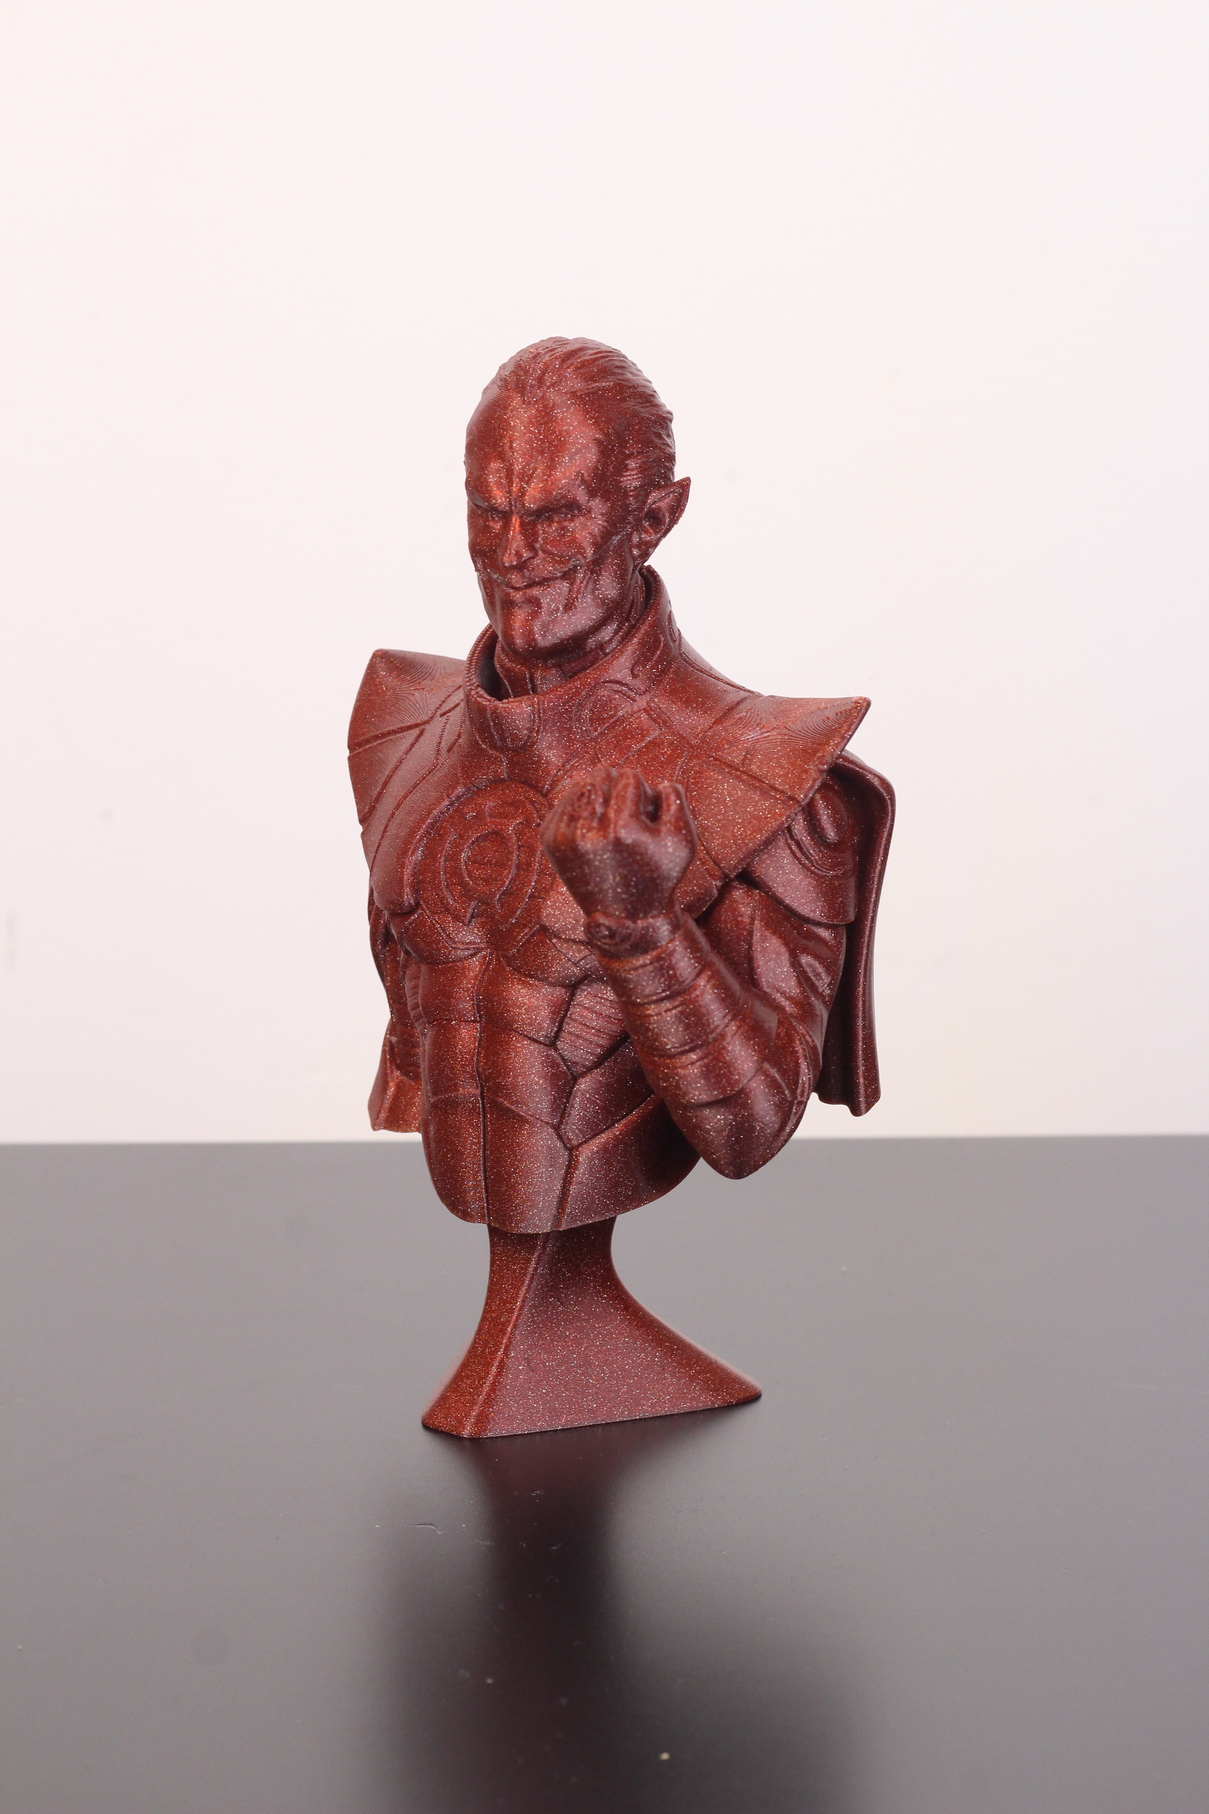 Sinestro Bust printed on the BIQU B1 SE Plus 4 | BIQU B1 SE PLUS Review: SKR 2 and ABL from Factory